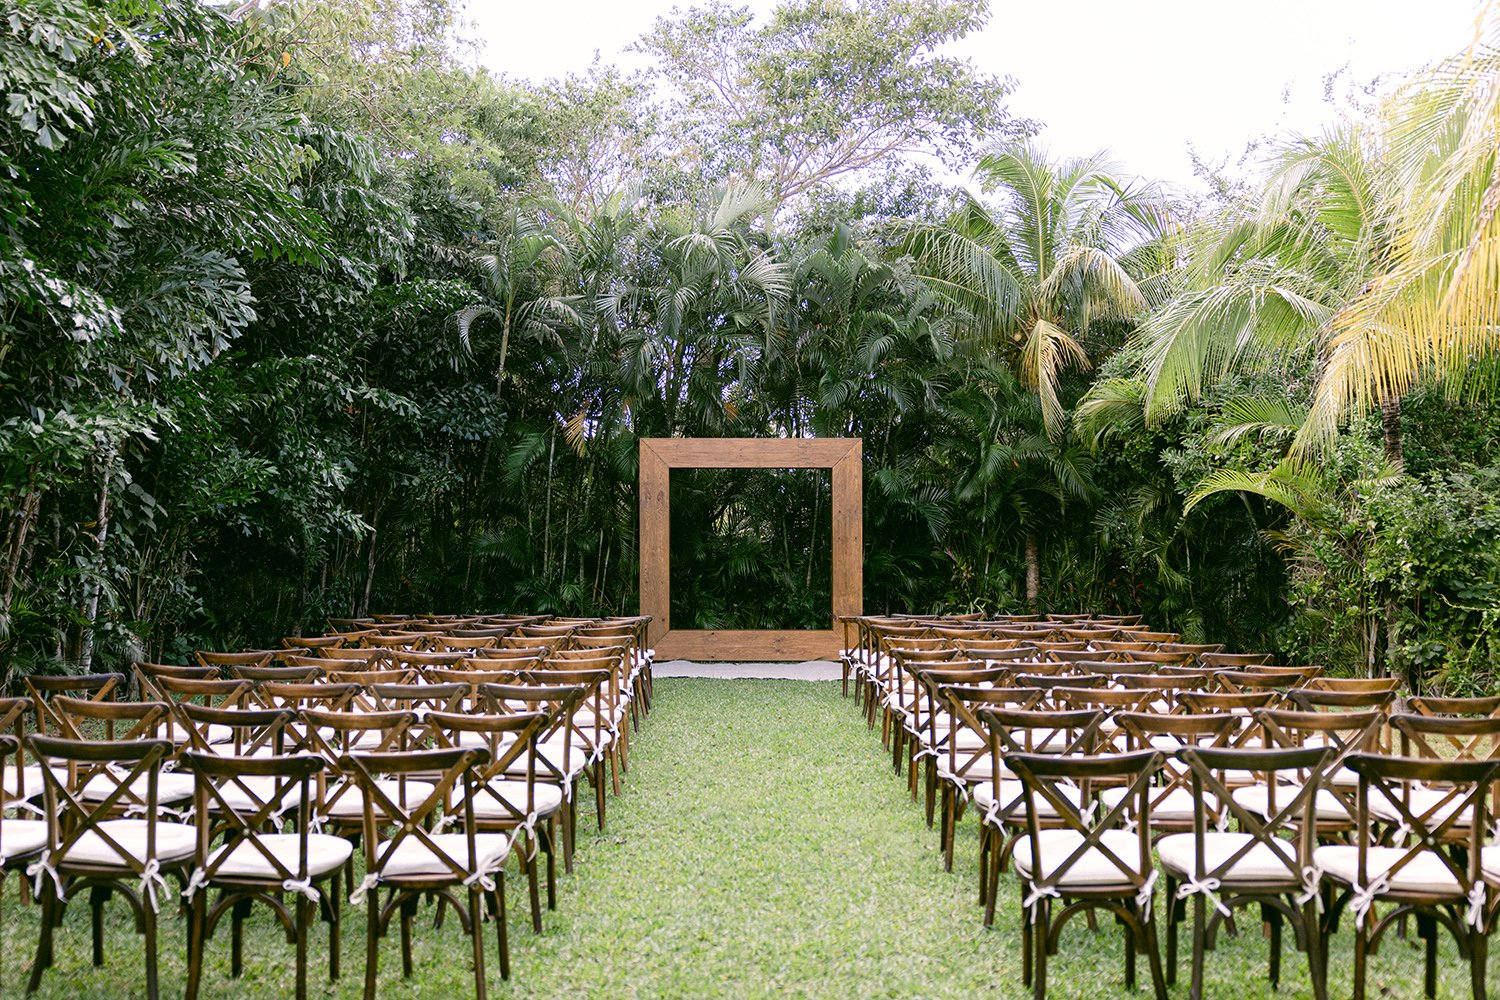 16 big green site full of tropical plants and decoration for the wedding ceremony at Rosewood Mayakoba Riviera Maya Cancun Mexico.JPG